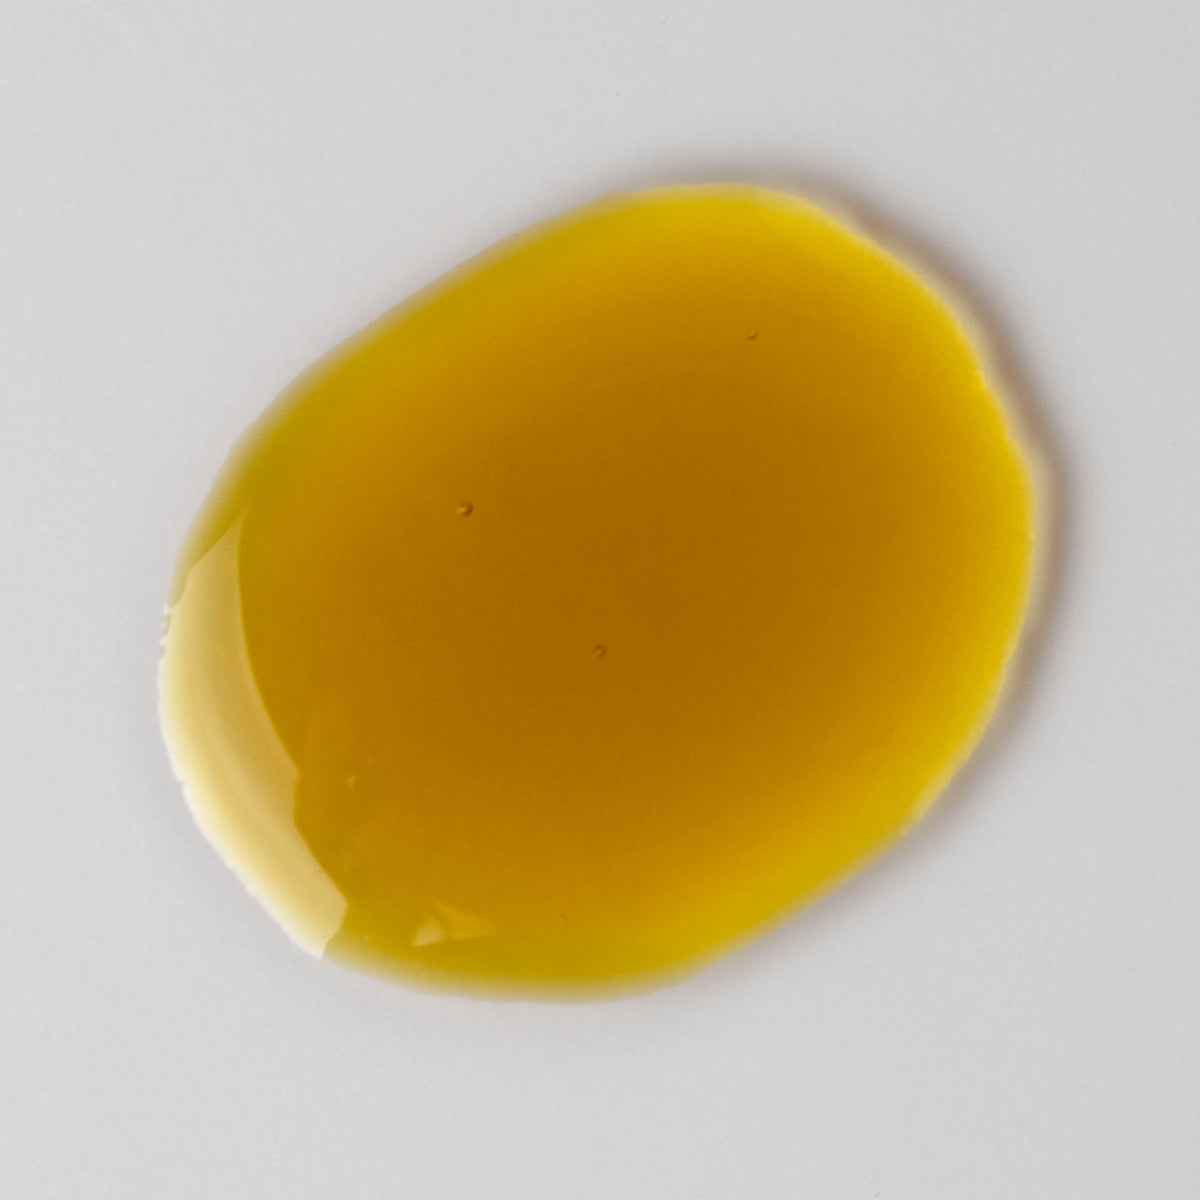 Rosemary CO2 Extract (Responsibly Grown)